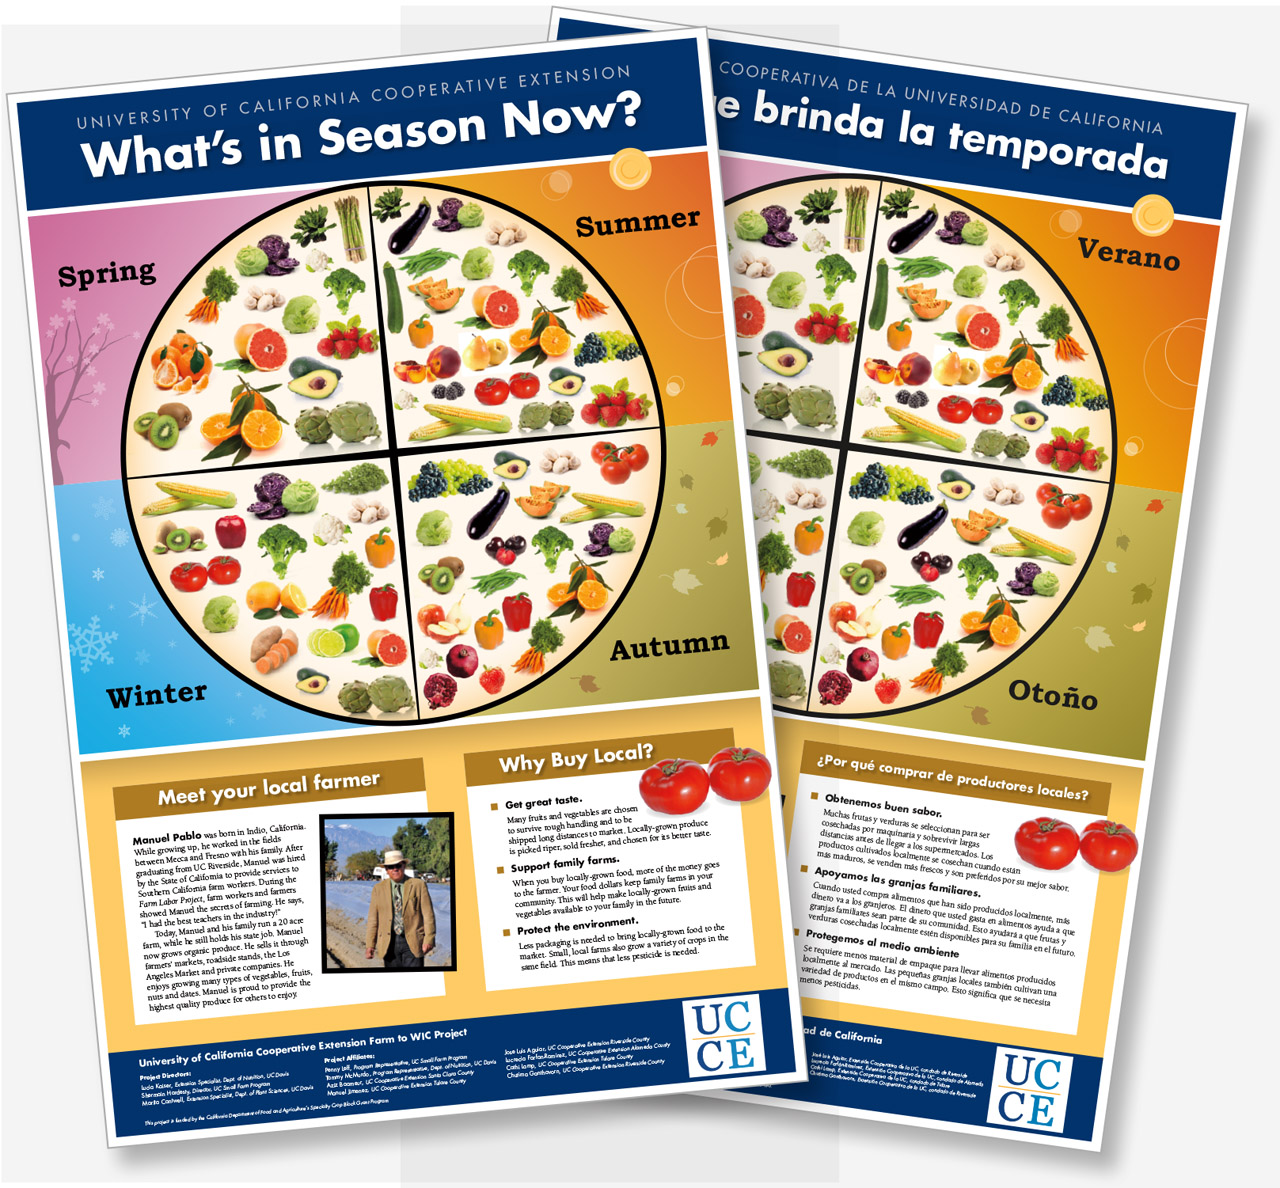 In support of the revised federal policy on WIC fruit and vegetable vouchers, UC ANR Cooperative Extension researchers created posters and fact sheets to promote nutrition education and increase demand for fresh produce among WIC participants.